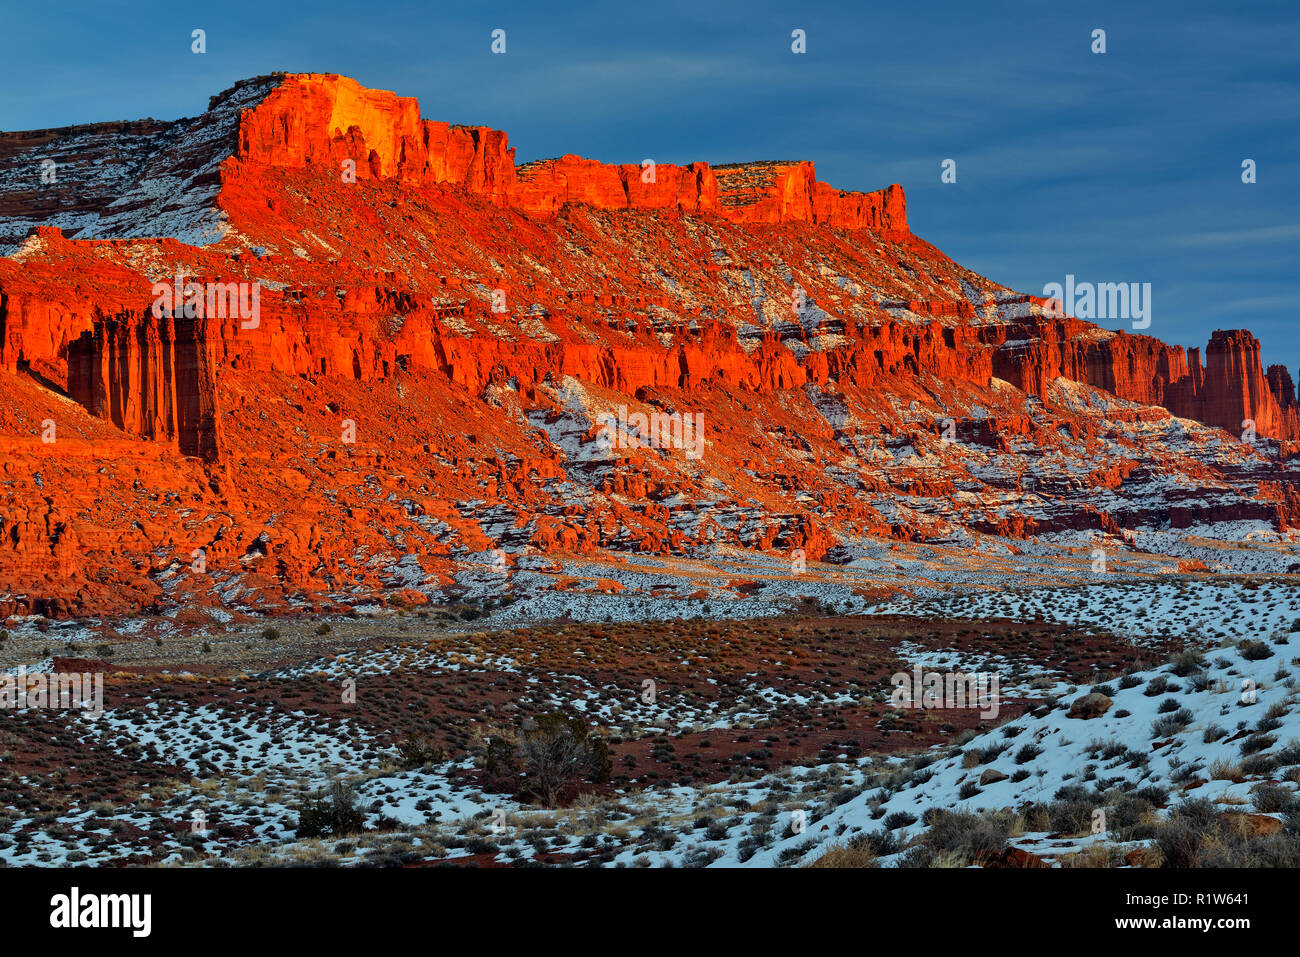 Red rock formations with snow in winter near sunset, Colorado Riverway Recreation Area, Utah, USA Stock Photo